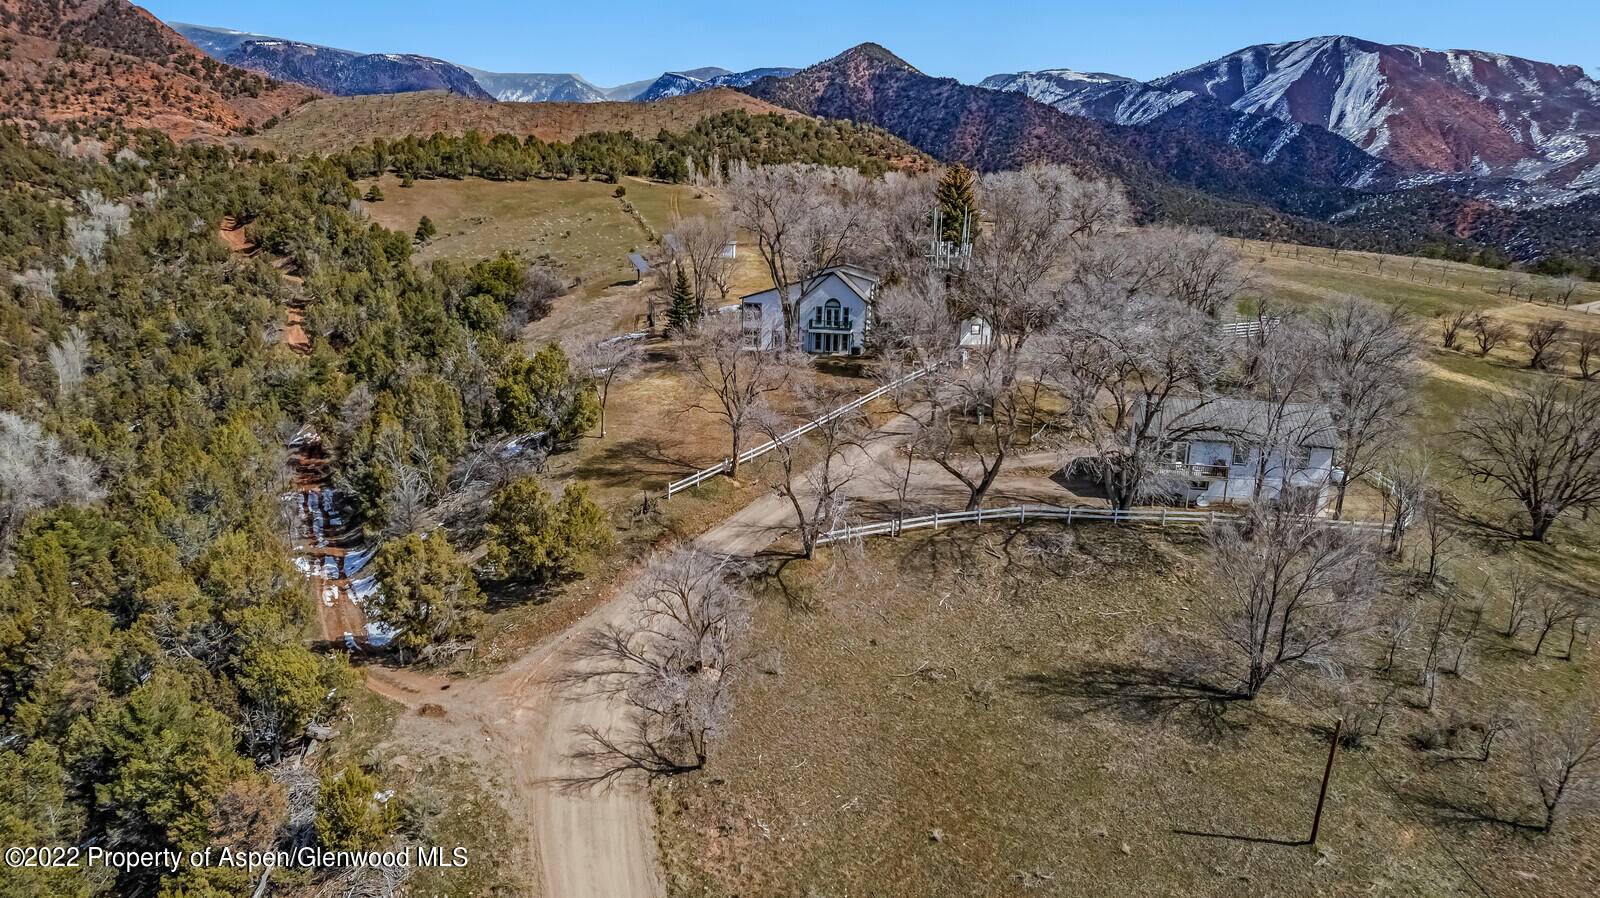 This stunning 14. 5 acre ranch comes with access to 960 acres of BLM land, your own backyard paradise, and perfect for riding horses, hiking, biking and exploring.